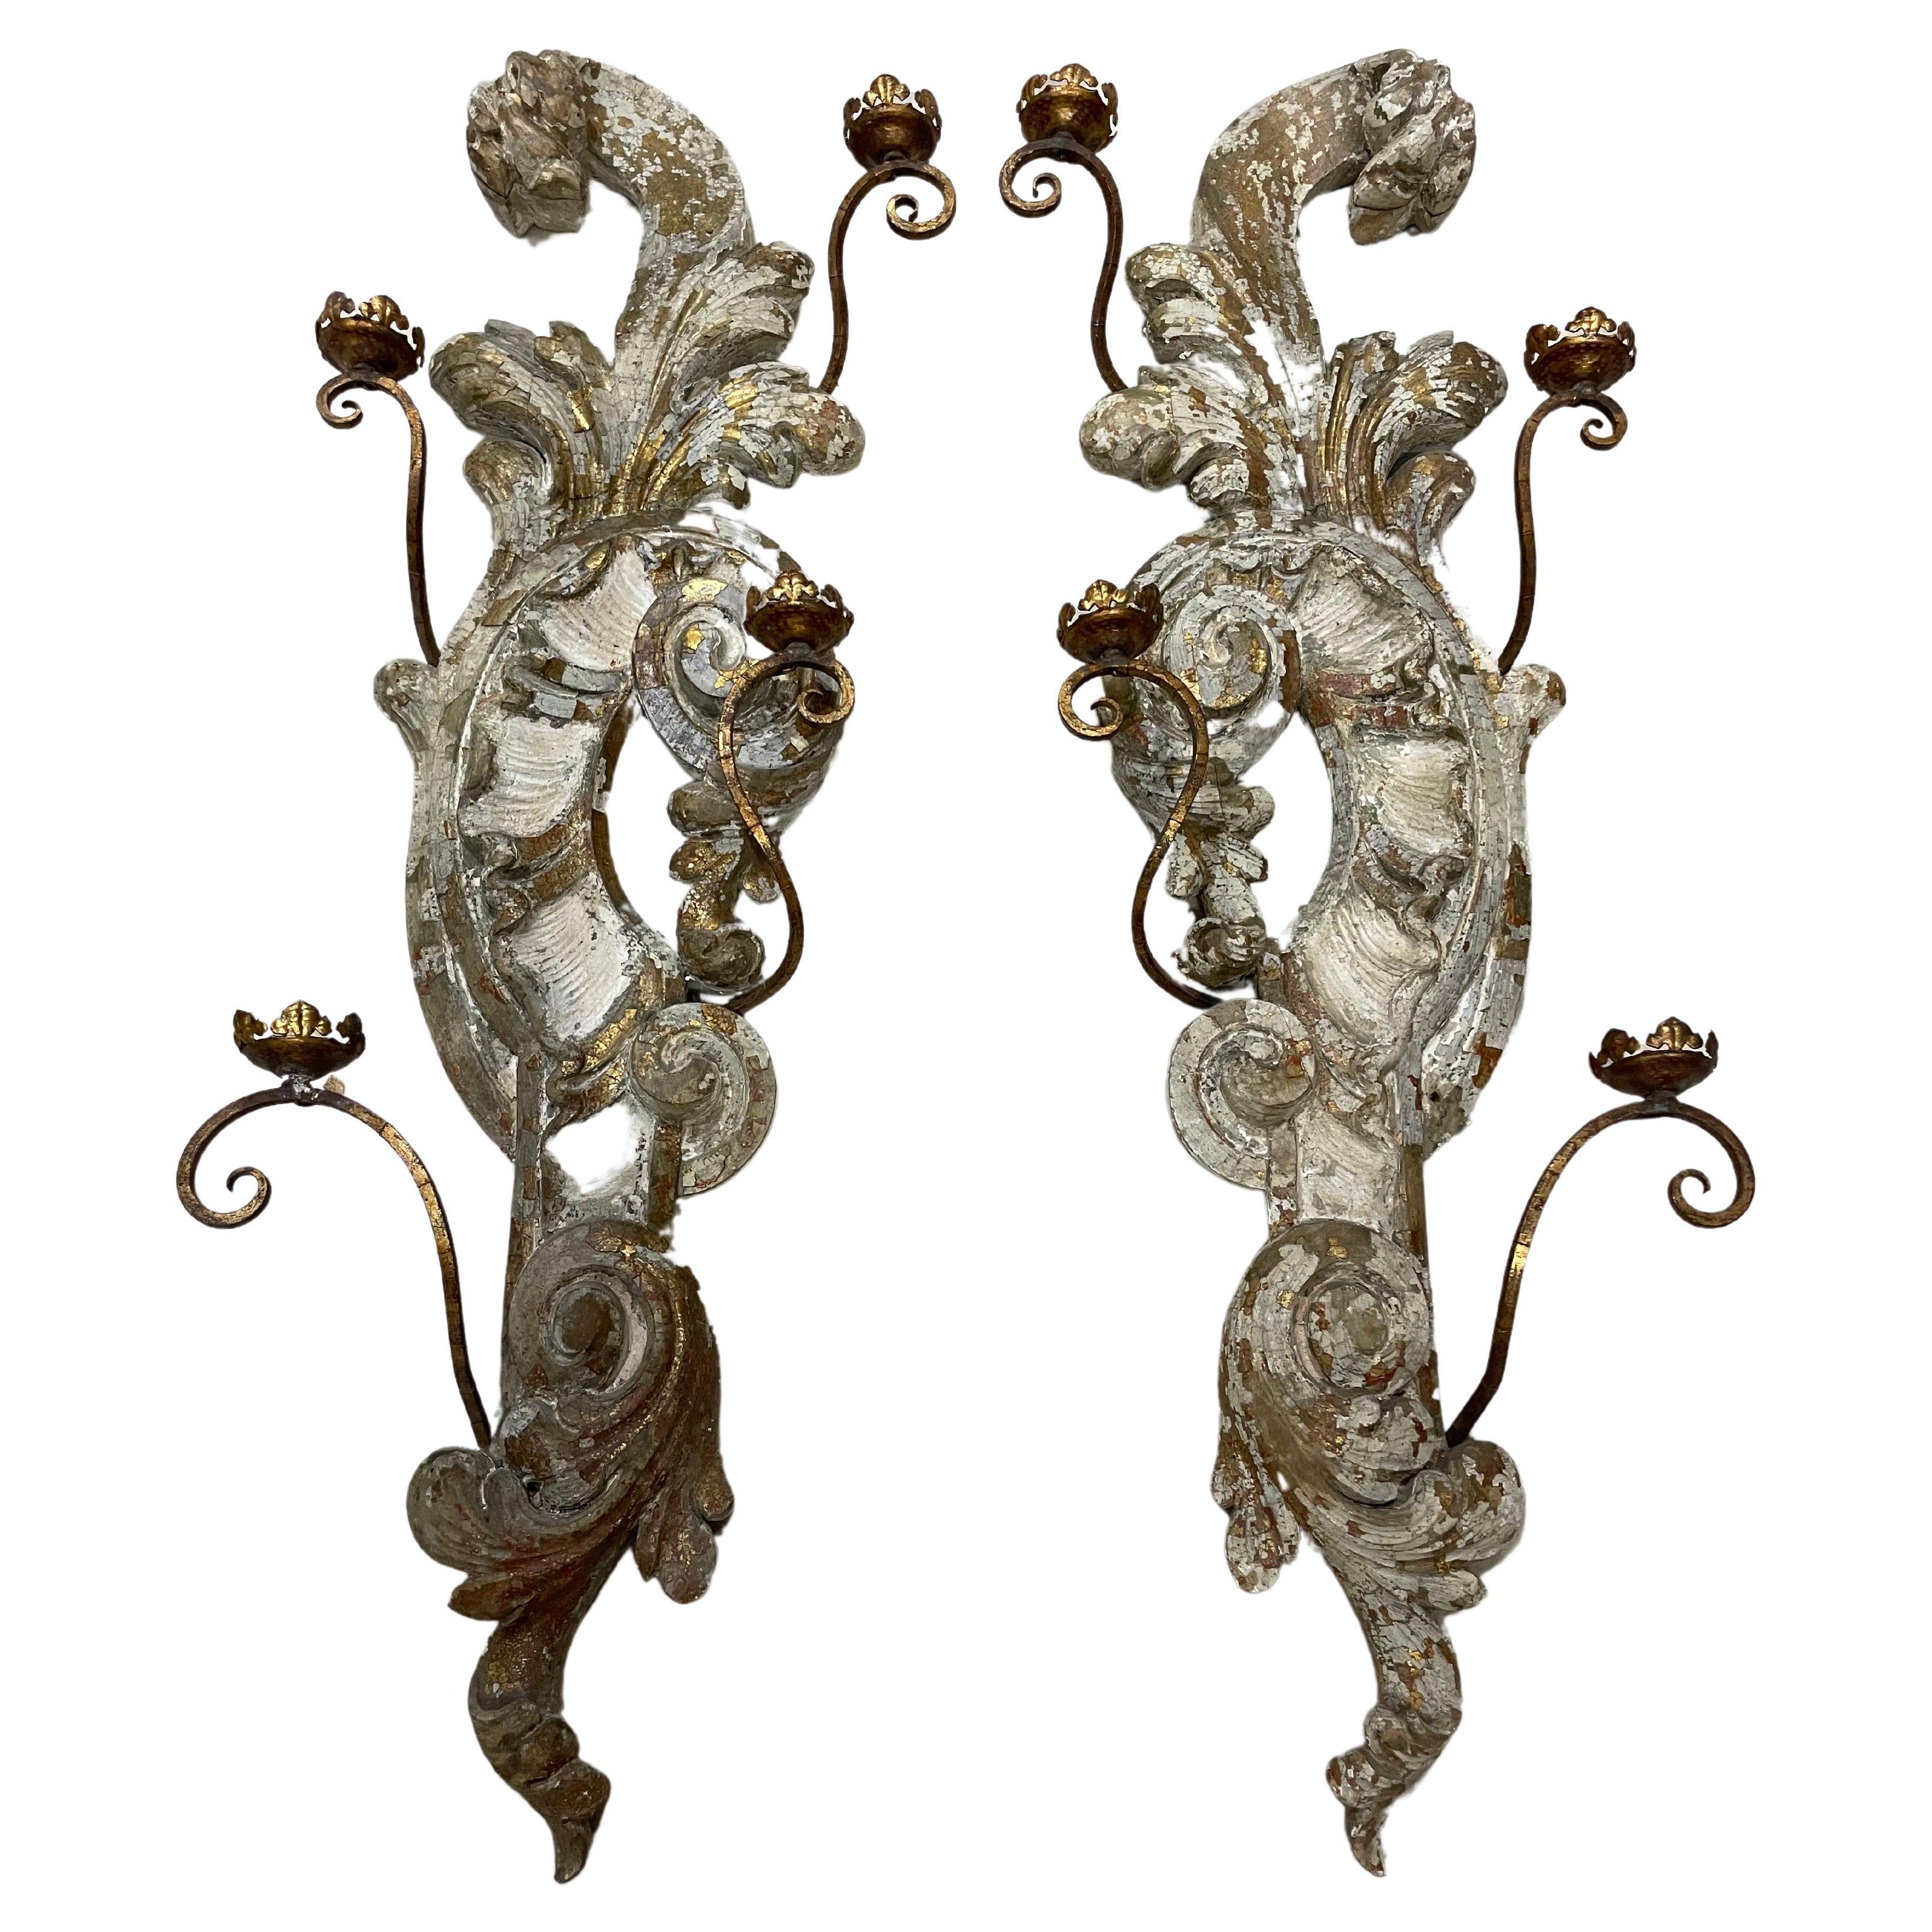 Spectacular Pair of Antique Italian Carved Wood Sconces, 19th Century